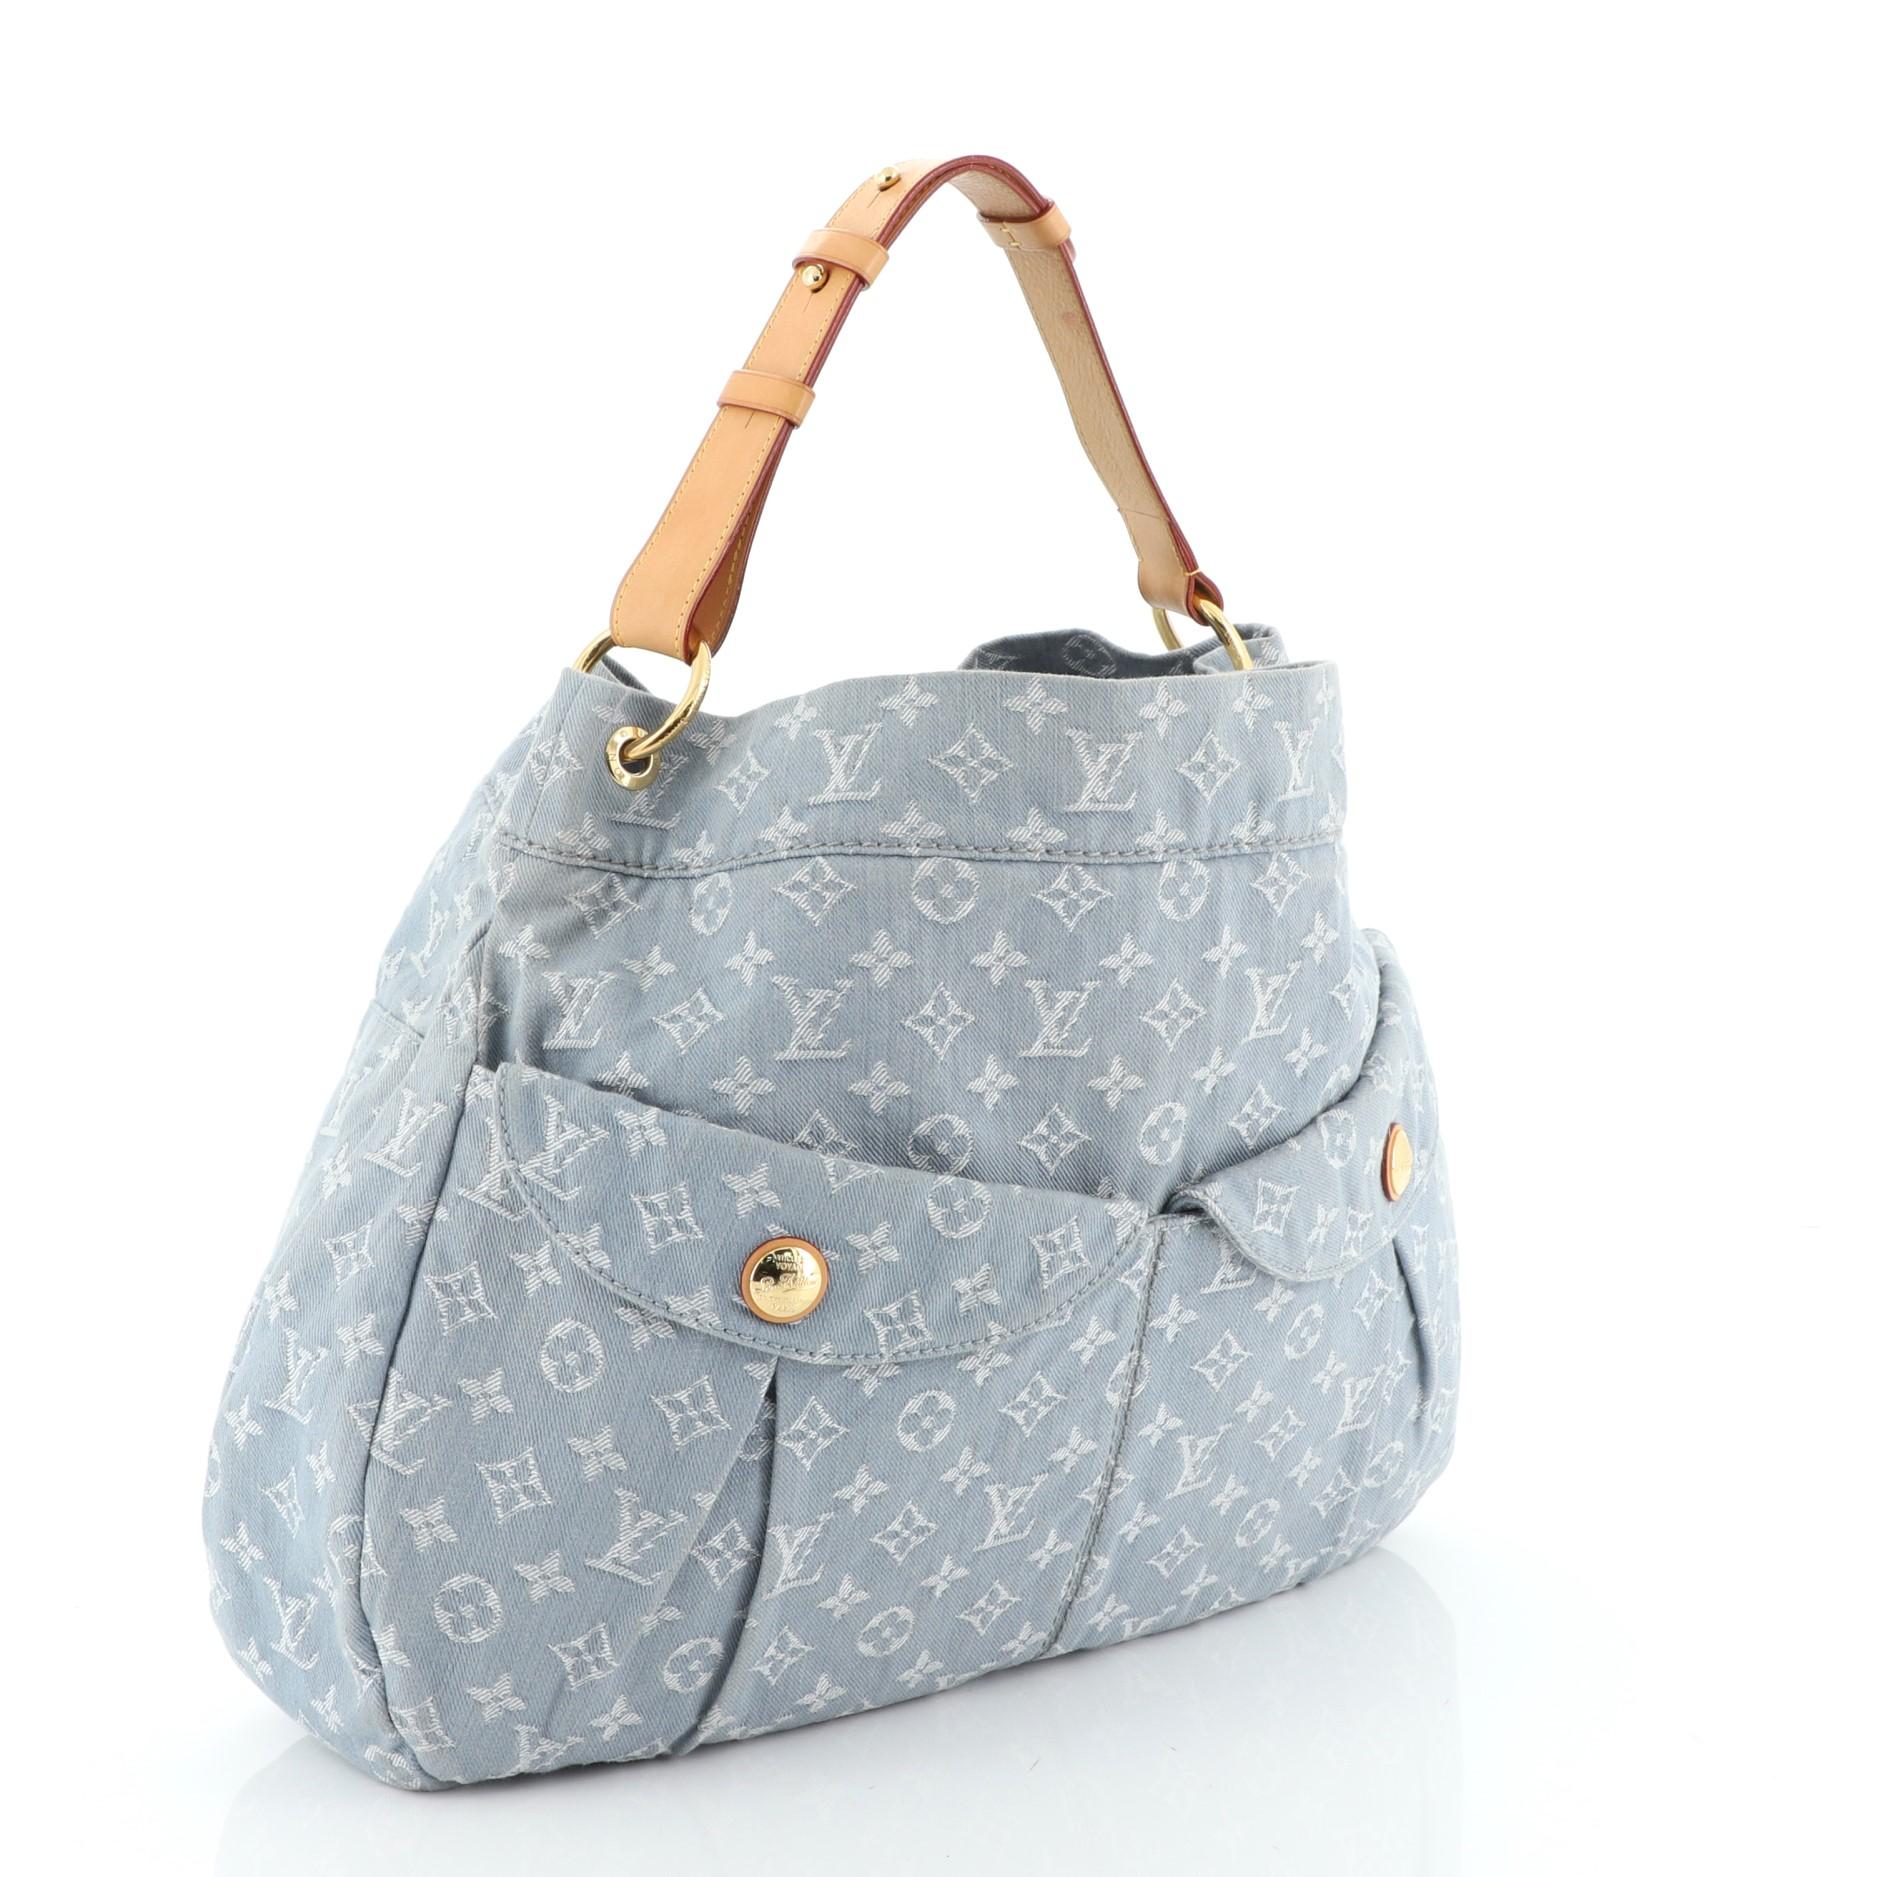 This Louis Vuitton Daily Handbag Denim GM, crafted from blue denim, features an adjustable vachetta leather shoulder strap, two exterior front pockets with snap button closure, and gold-tone hardware. Its hook closure opens to a gray microfiber